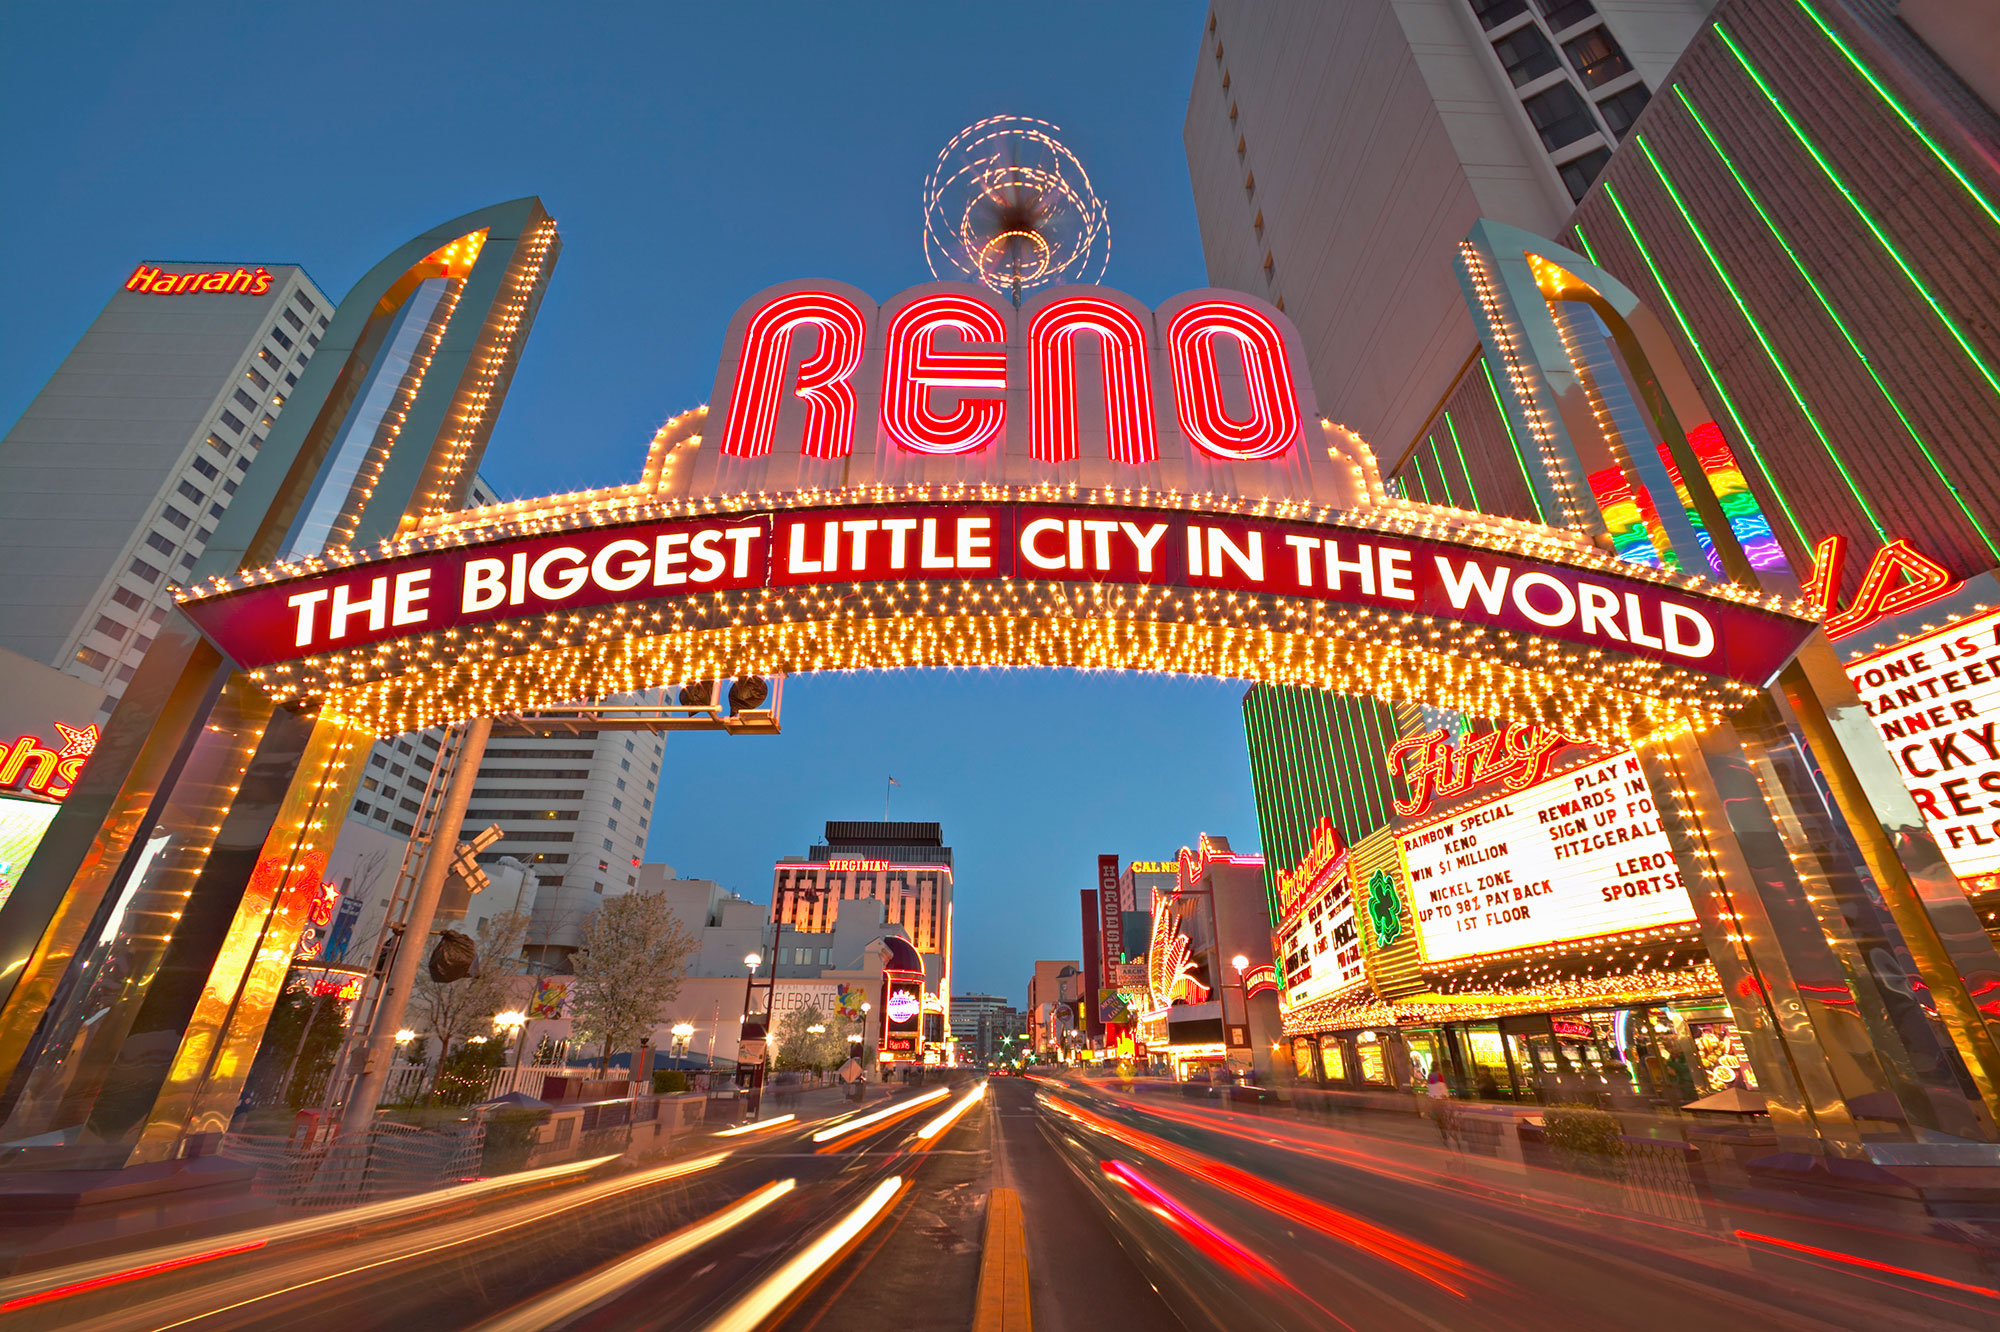 CLD will be at ASCLD 2022 Annual Symposium in Reno!